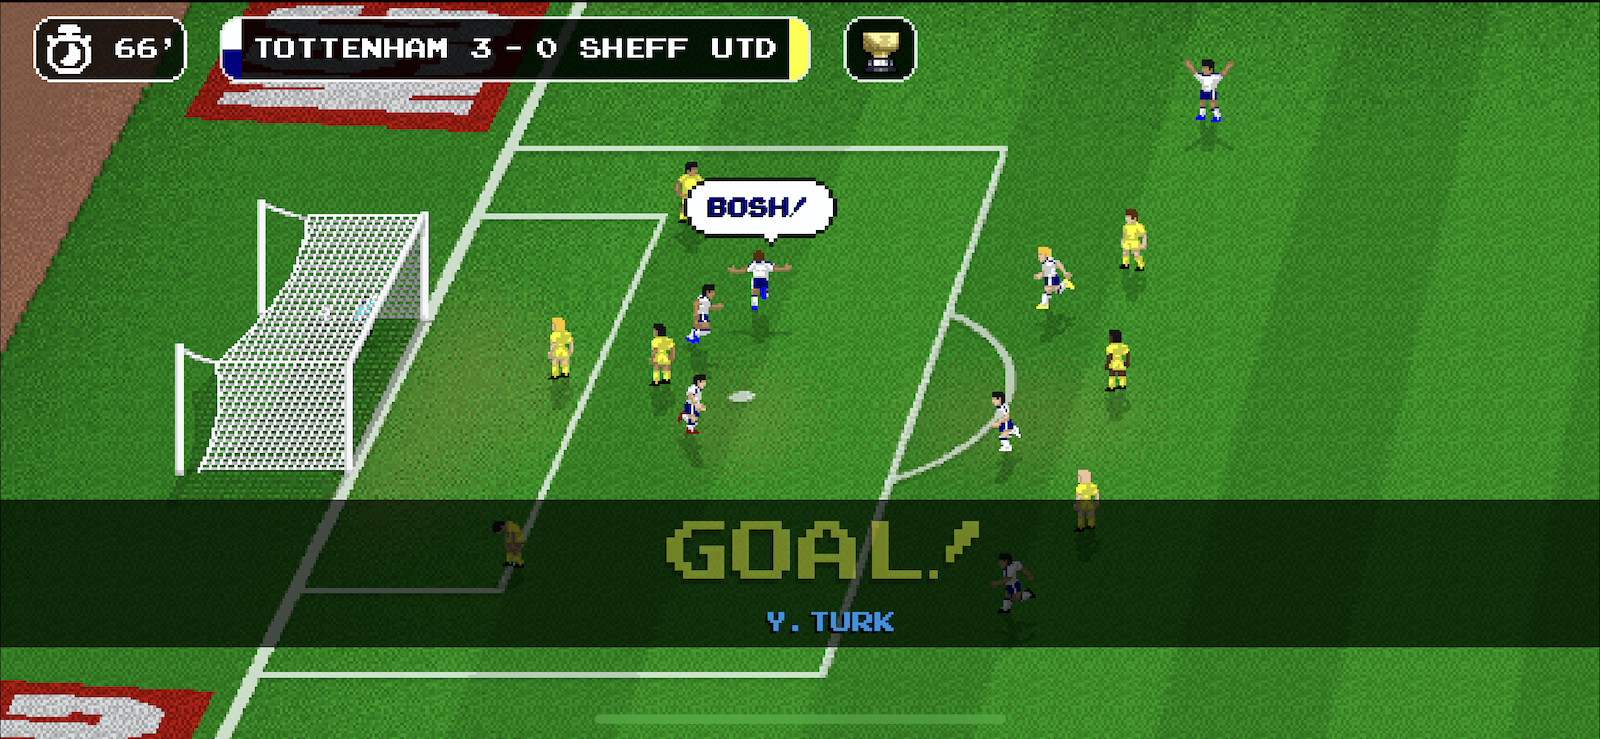 A screenshot of Retro Goal in which I have just scored, with my player exclaiming "Bosh!"